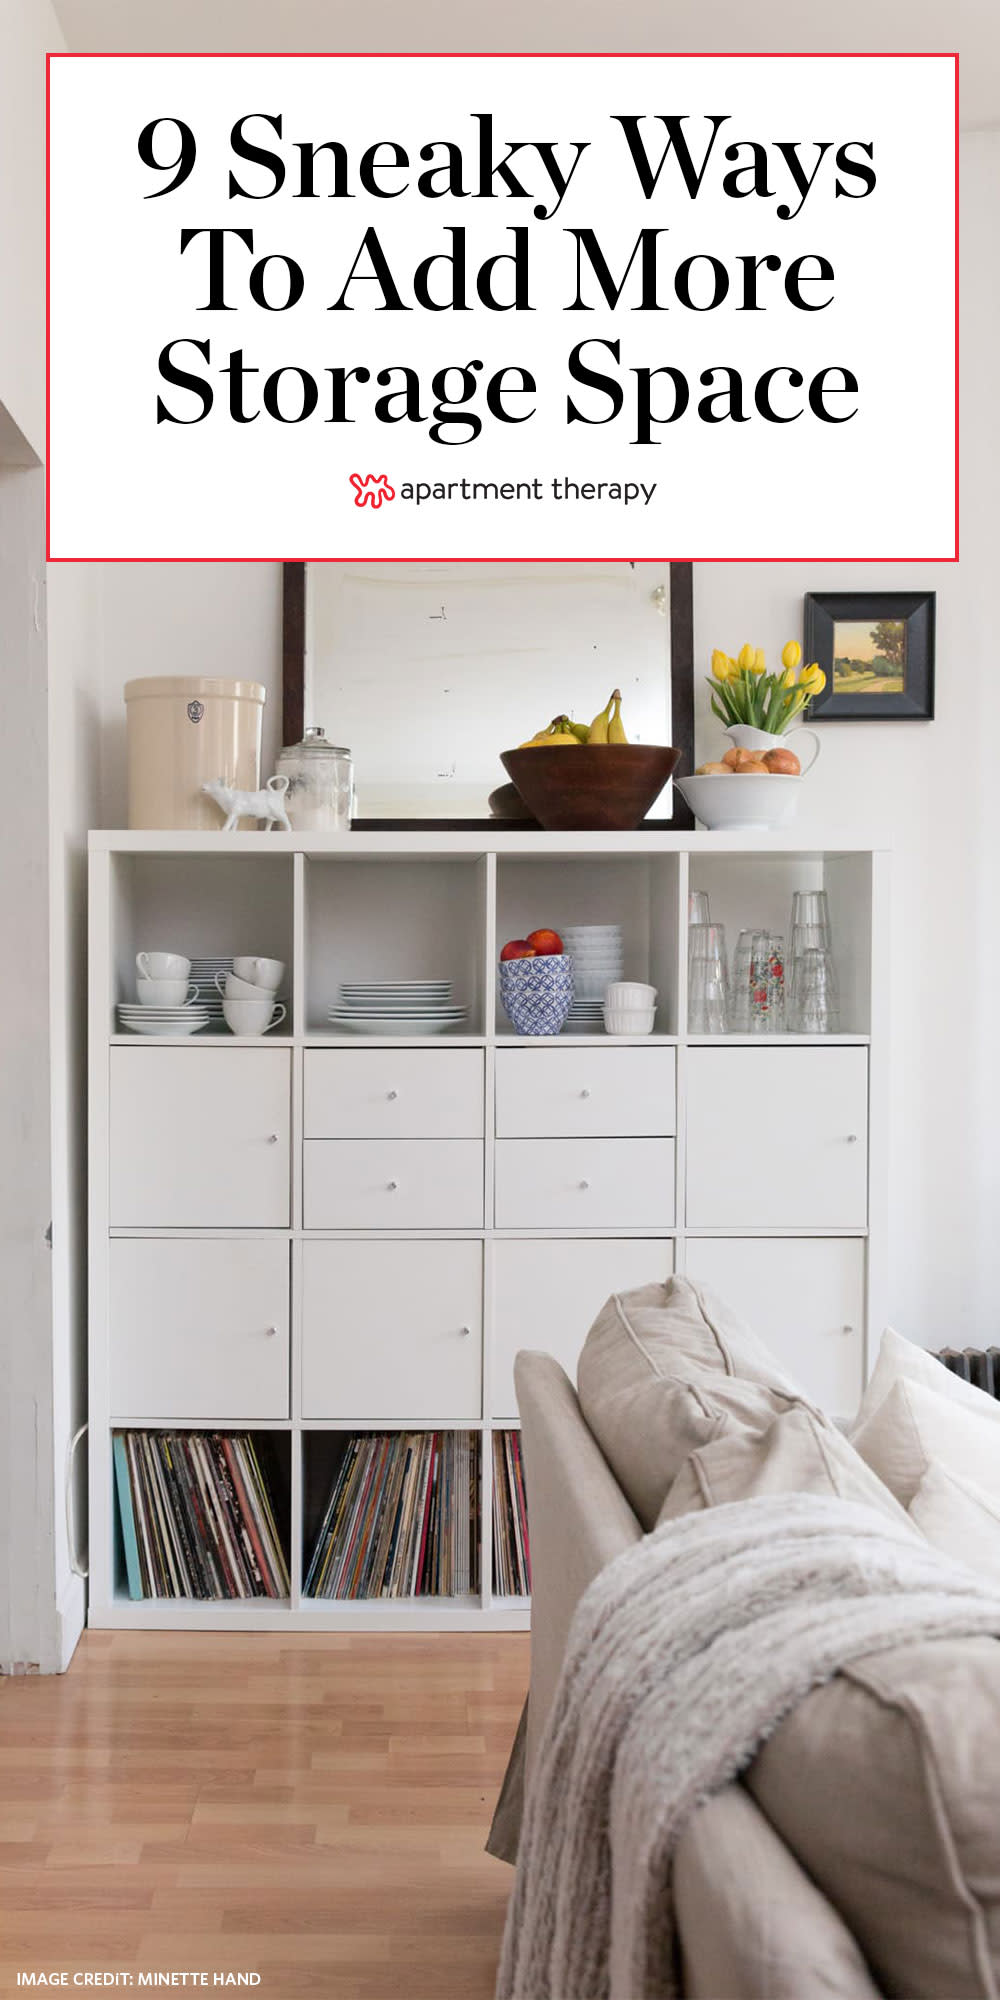 No More Unused Space: How To Fit More Storage into a Small